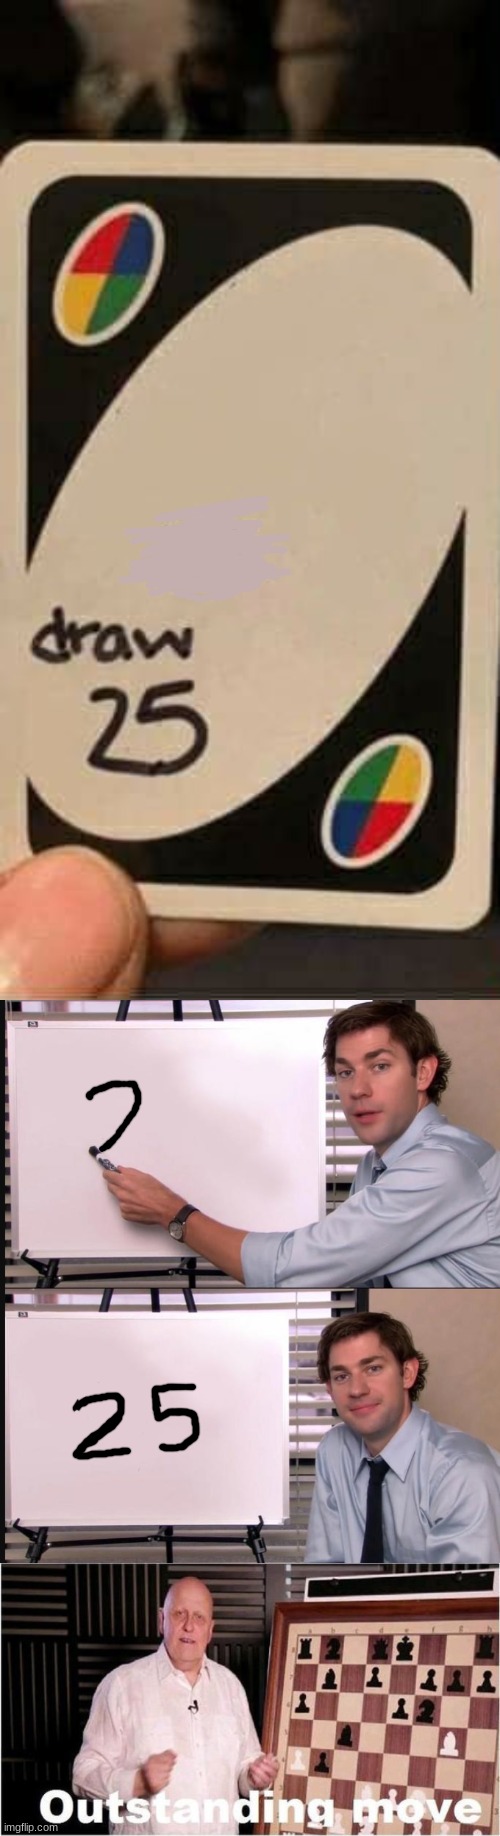 When you're playing Uno with less than 25 cards | image tagged in memes,uno draw 25 cards,jim halpert pointing to whiteboard,outstanding move,funny | made w/ Imgflip meme maker